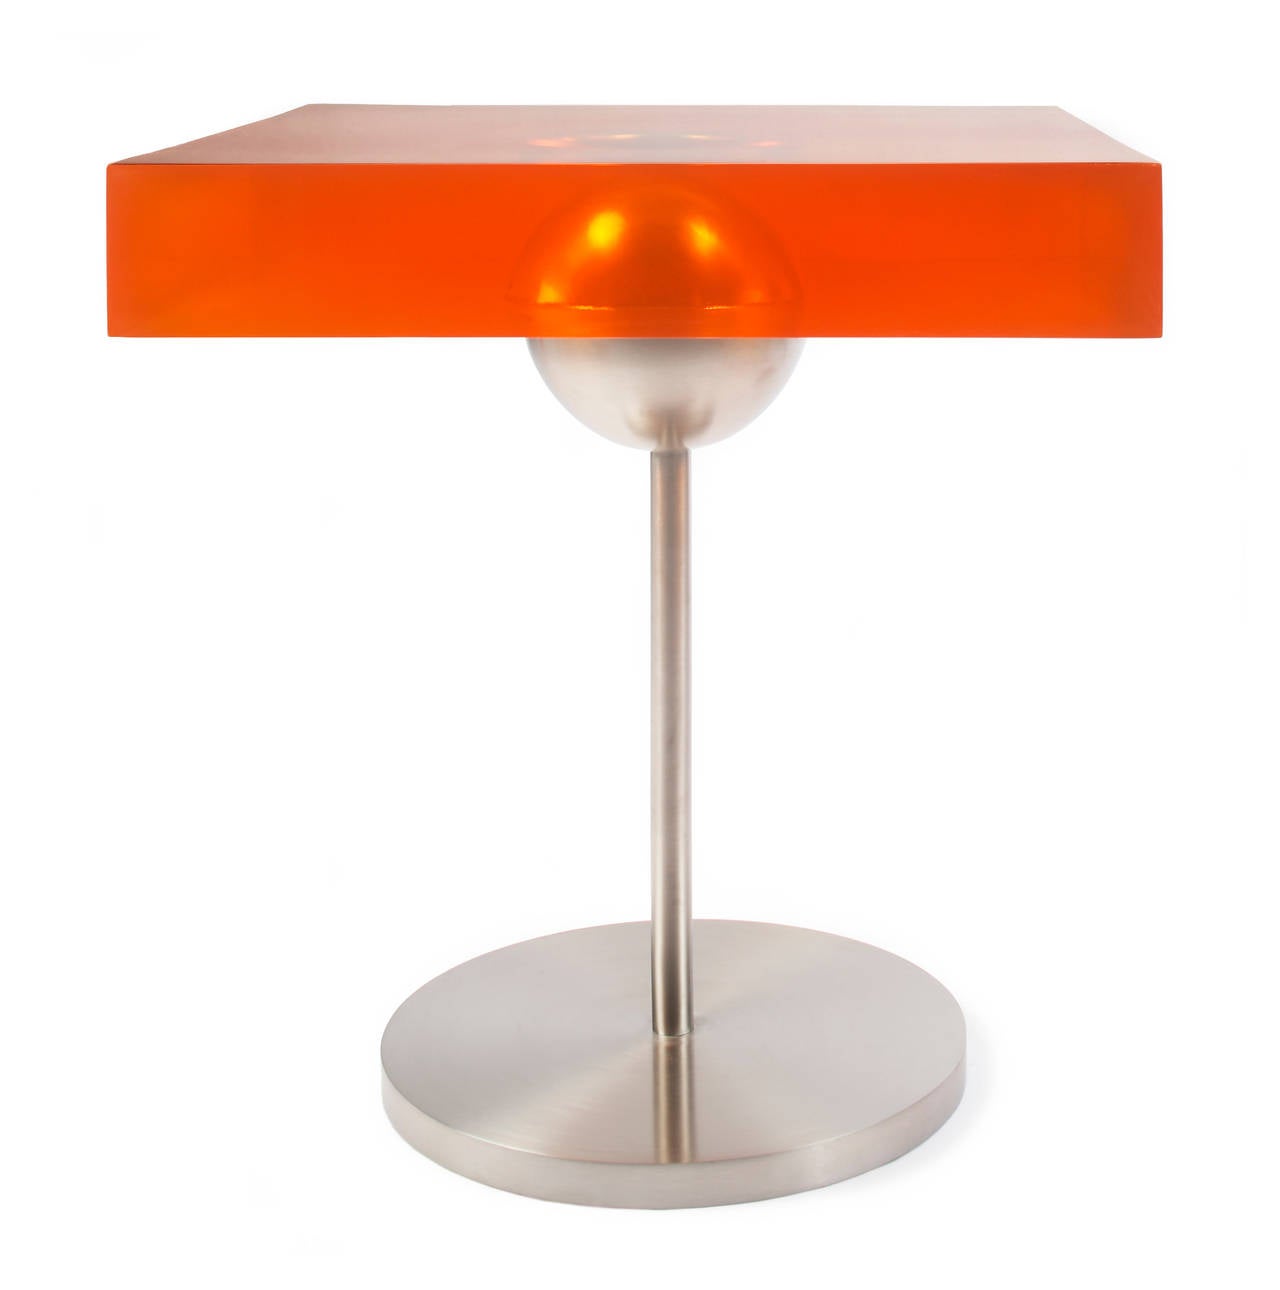 A stainless steel ball is embedded within a 31/2" thick transparent tangerine resin tabletop. Available in other colors. Each angle surprises with its myriad optical illusions created by the light bouncing off the ball within the liquid texture